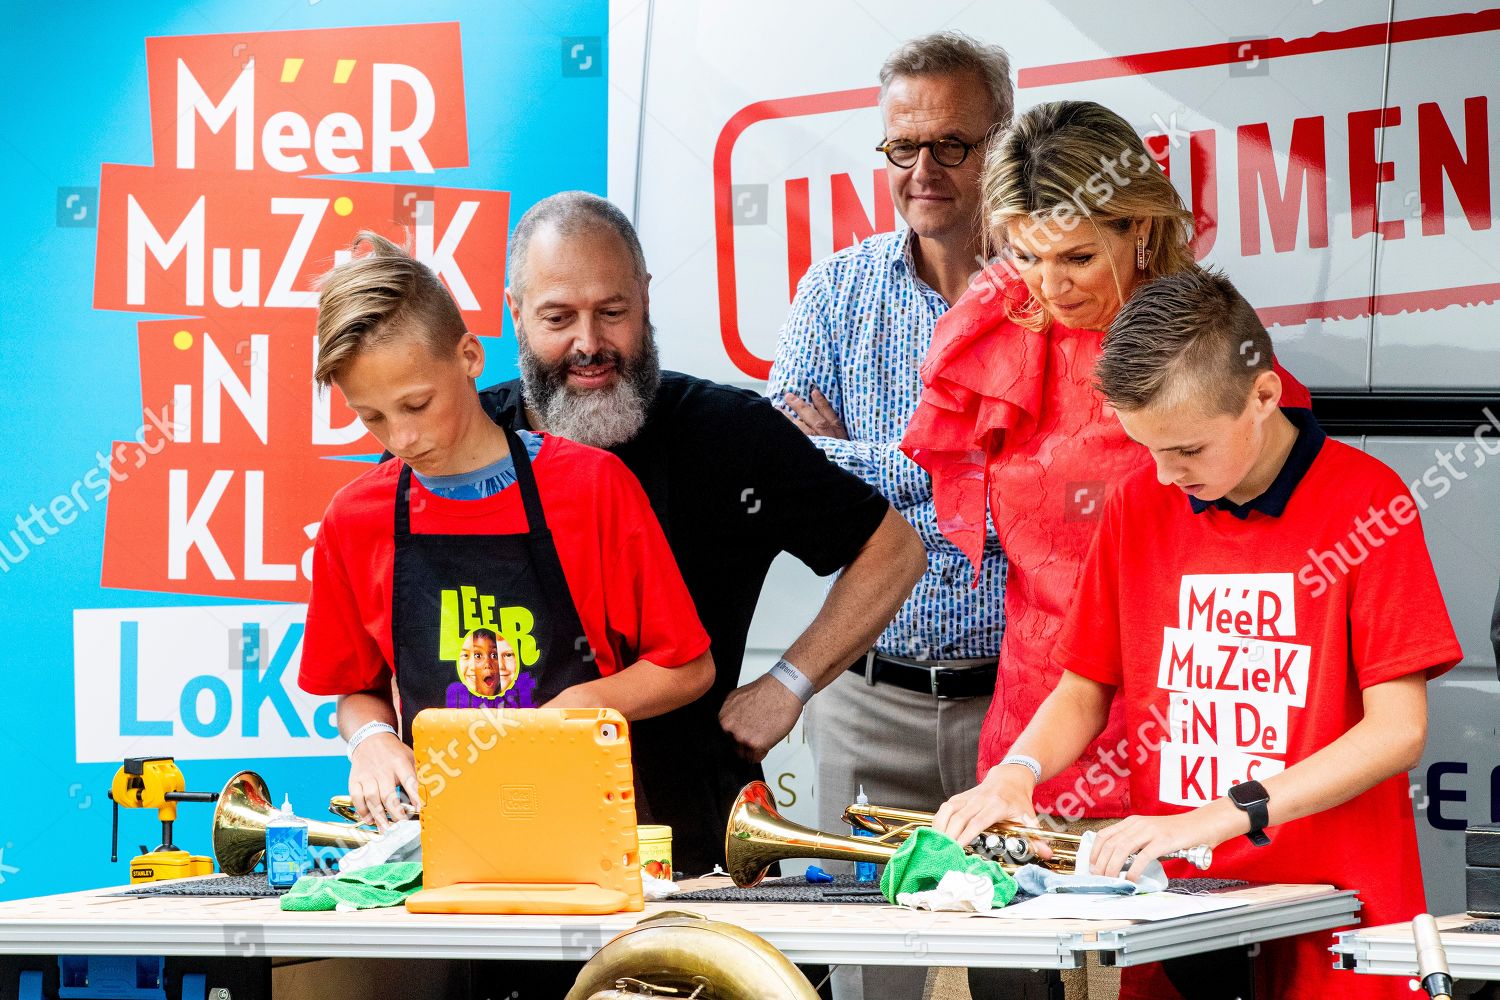 queen-maxima-signing-the-more-music-covenant-in-the-classroom-drenthe-the-netherlands-shutterstock-editorial-10317726ai.jpg